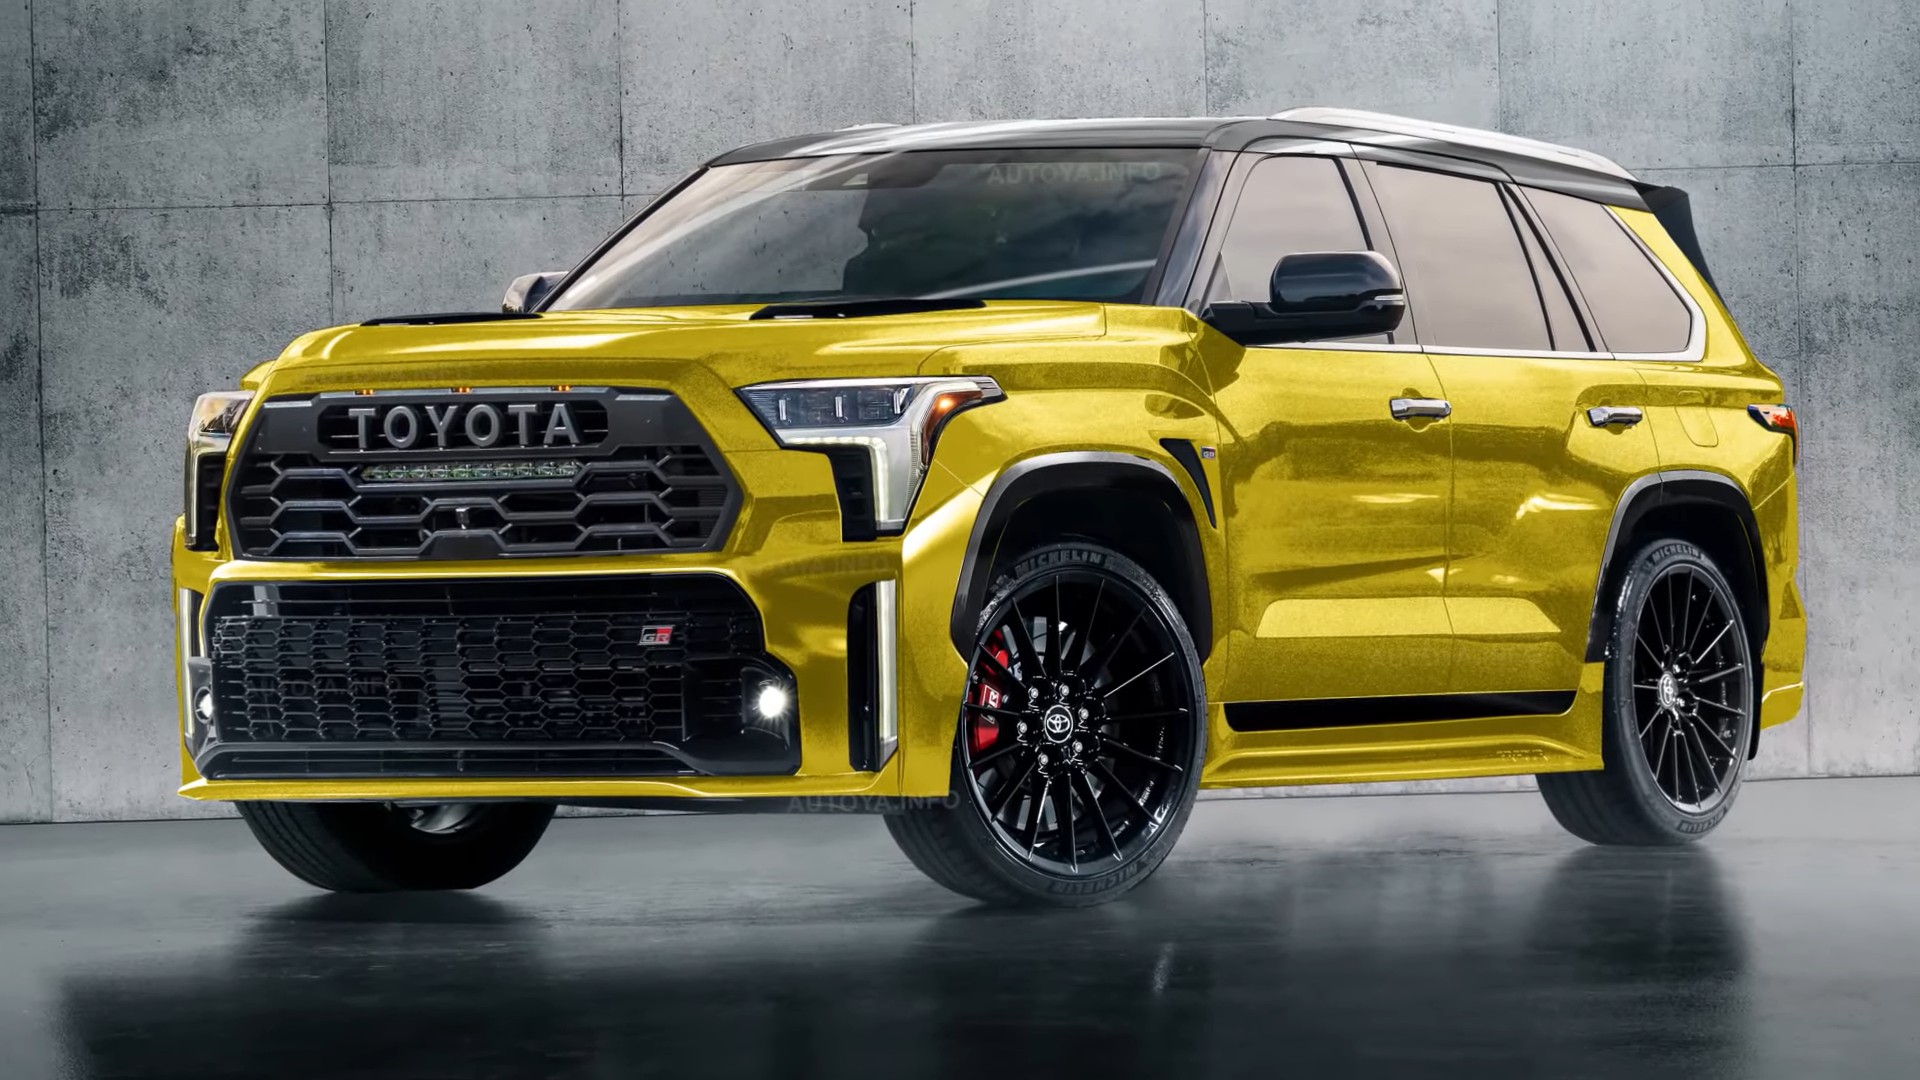 Virtual 600HP Toyota Sequoia GR Sport Presented as “Most Powerful” 3Row SUV autoevolution